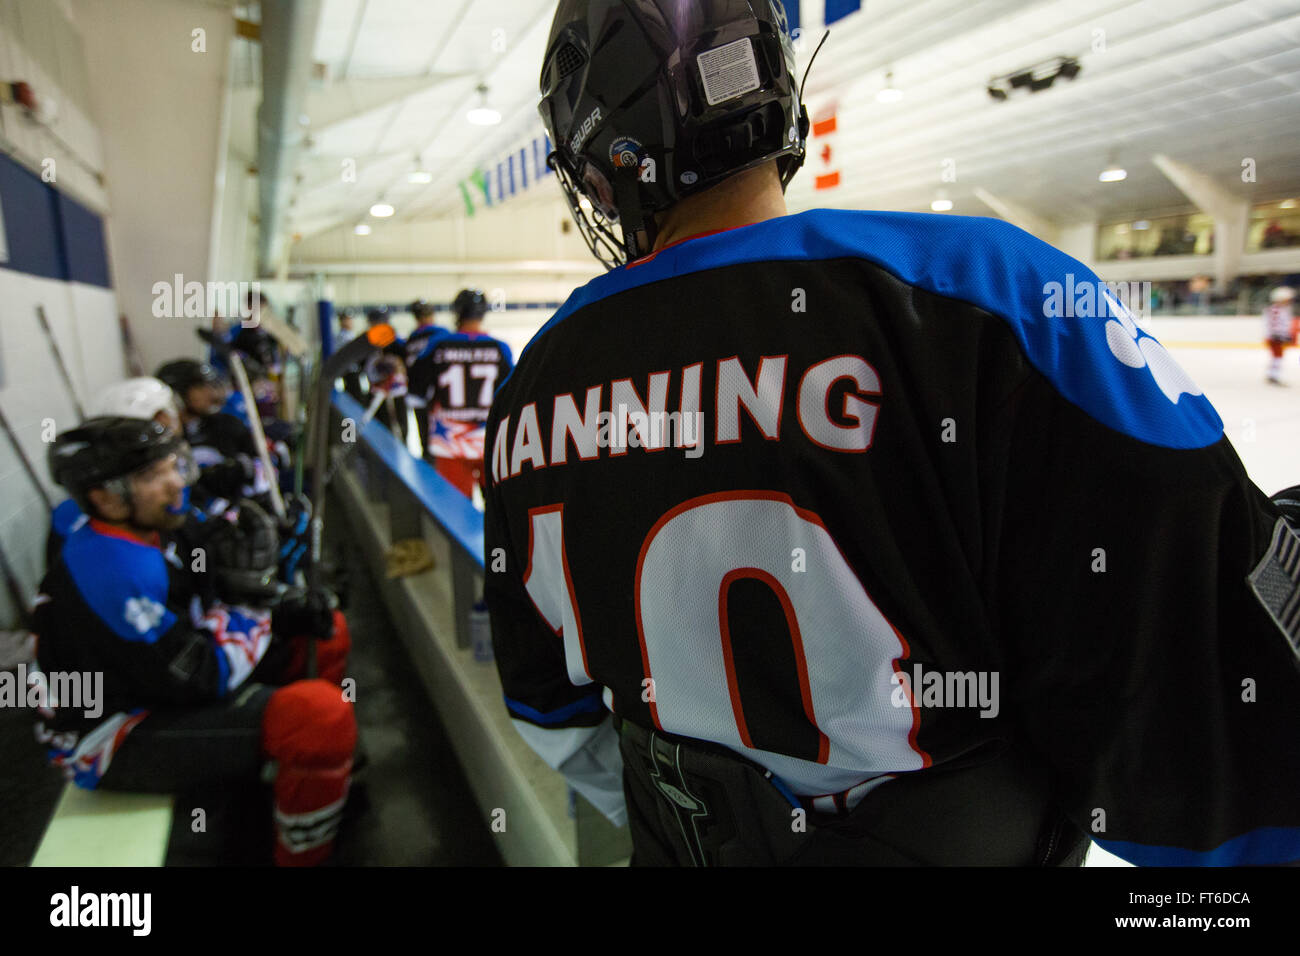 The CBP/ICE hockey team defeats Homeland Security's hockey team 4-2 in the first round of the World Police and Fire Games being held in Reston Virginia on June 27, 2015. The games attract over 10,000 participants to the competition. Photo by James Tourtellotte Stock Photo